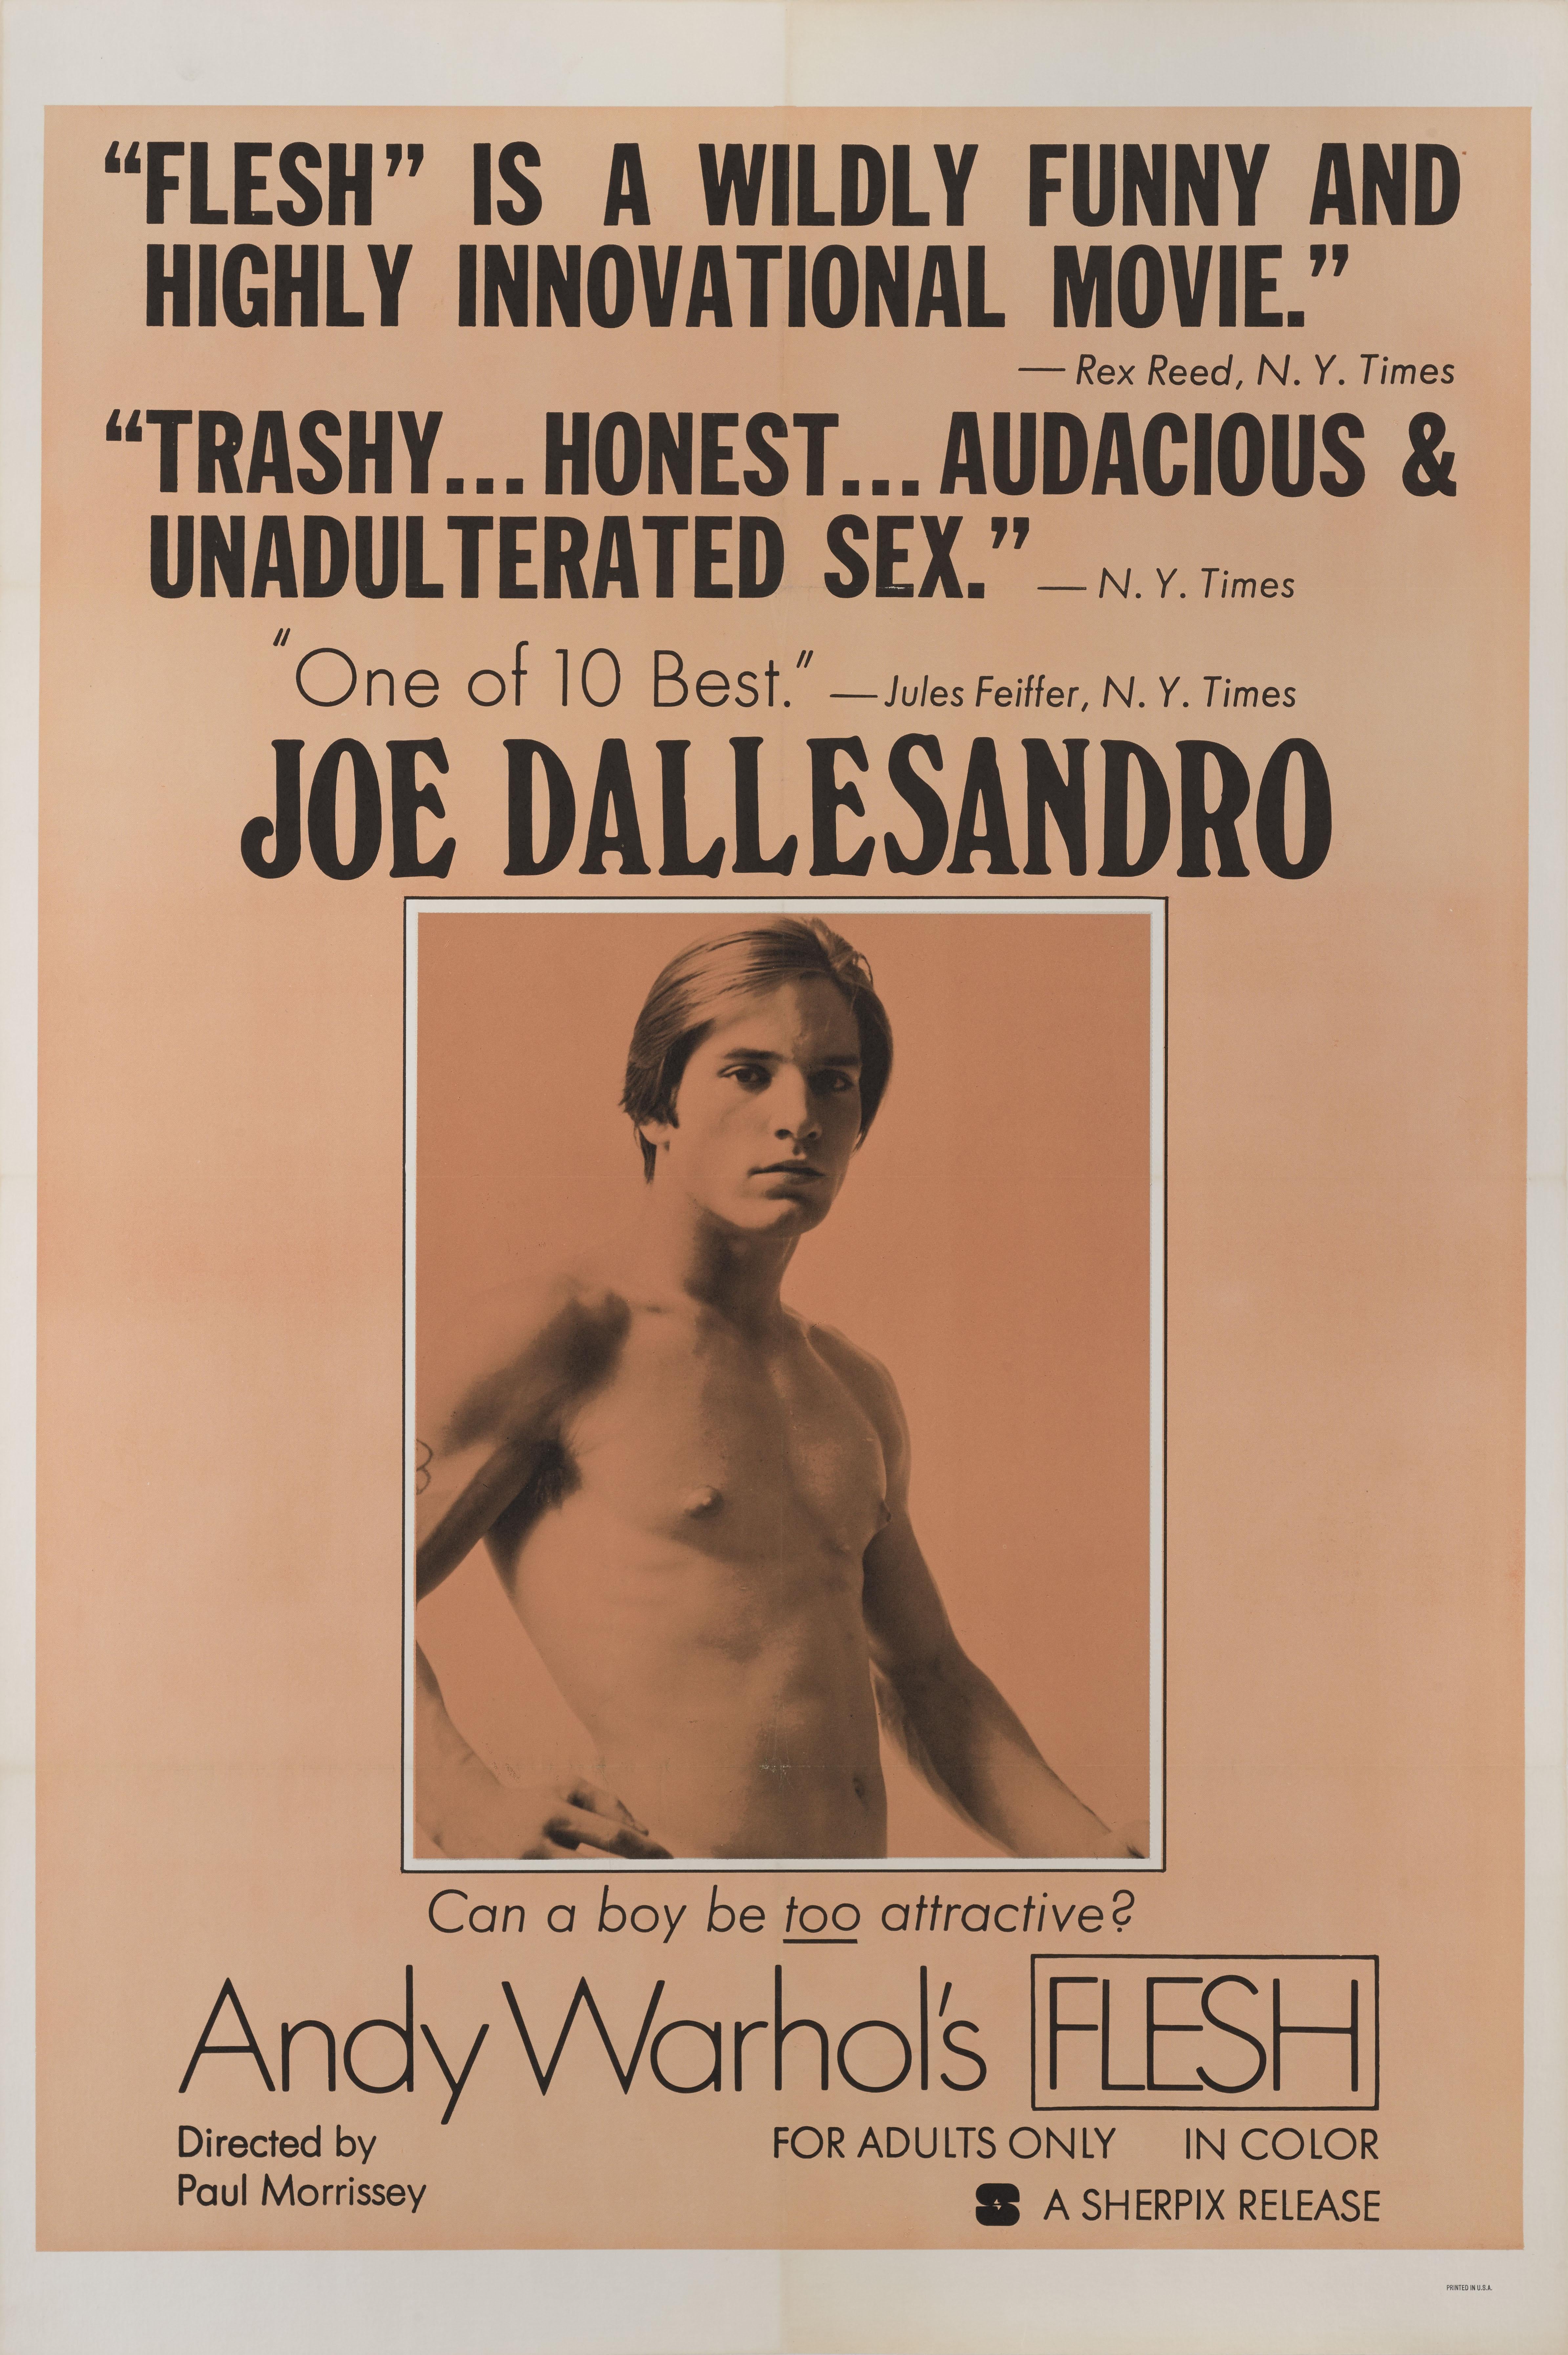 Original US film poster for the 1968 drama staring Joe Dallesandro and Geraldine Smith, and directed by Paul Morrissey. This film was produced by Andy Warhol. The photograph used for this poster was taken by Francesco Scavullo (1921-2004)
This